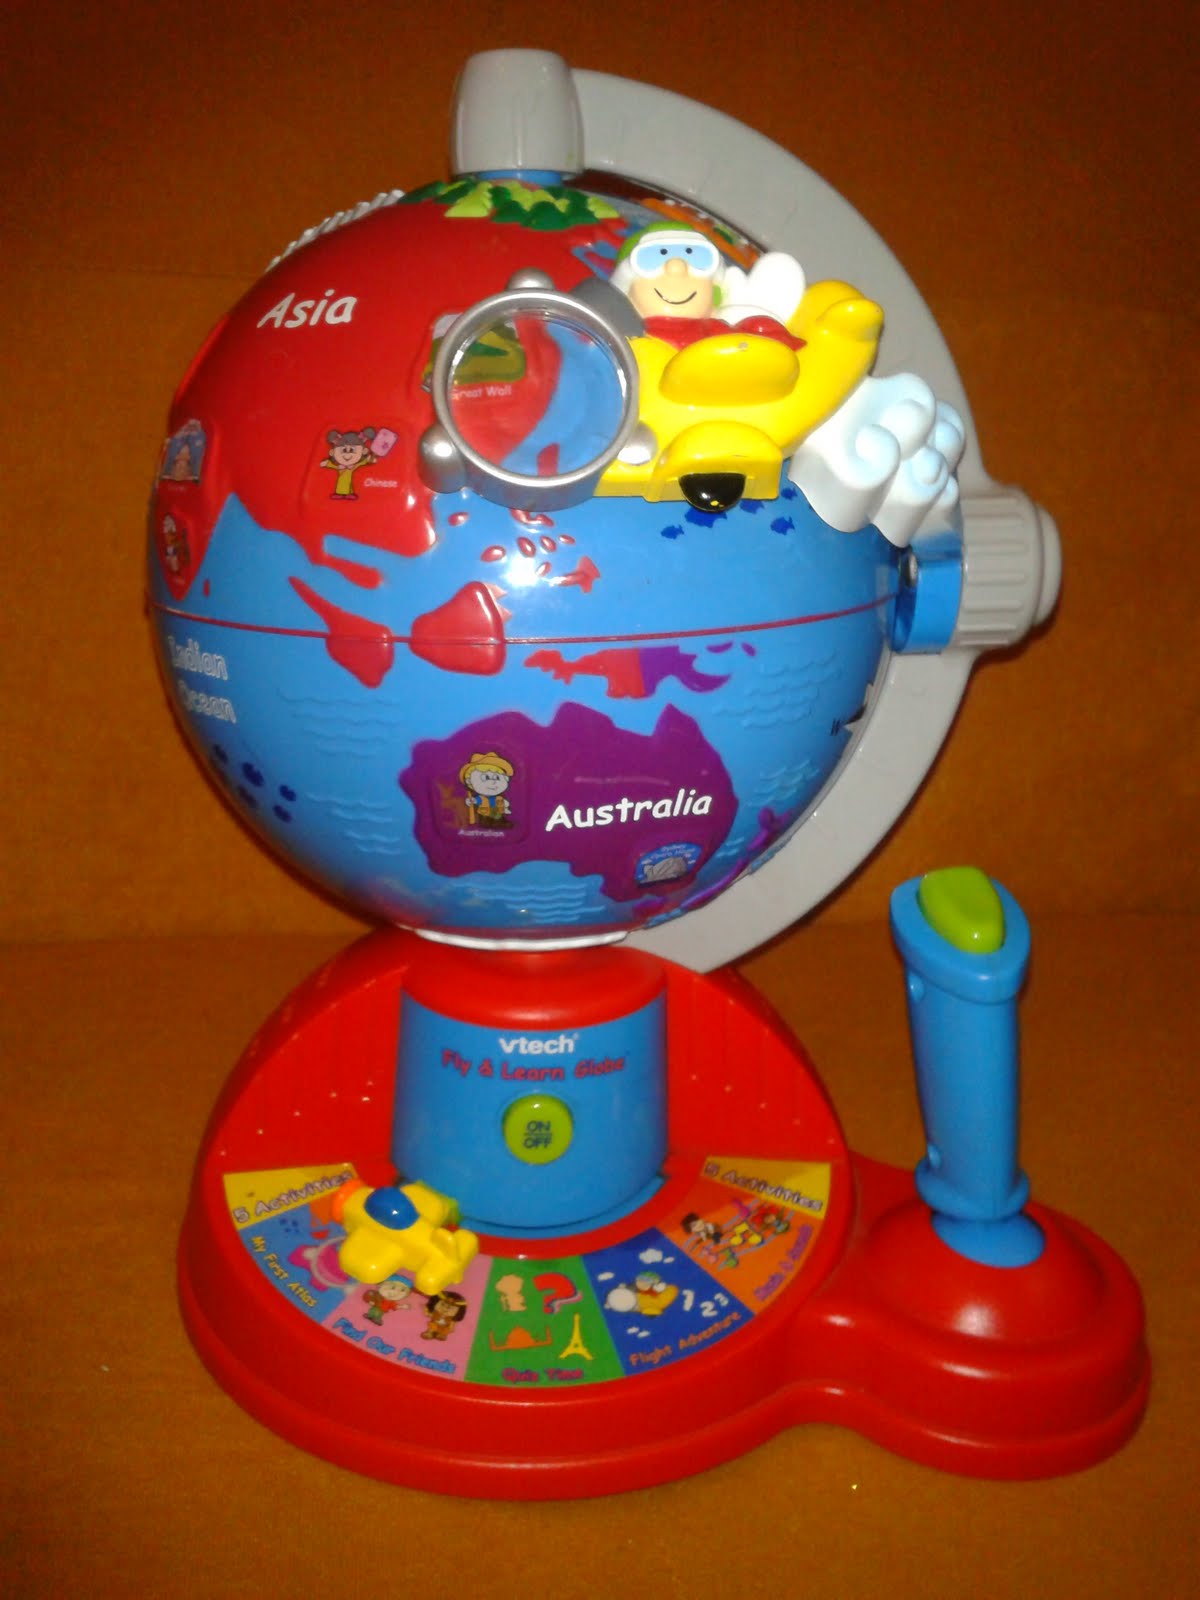 Vtech Fly And Learn Globe Interactive Educational Talking Toy Atlas -  Geography